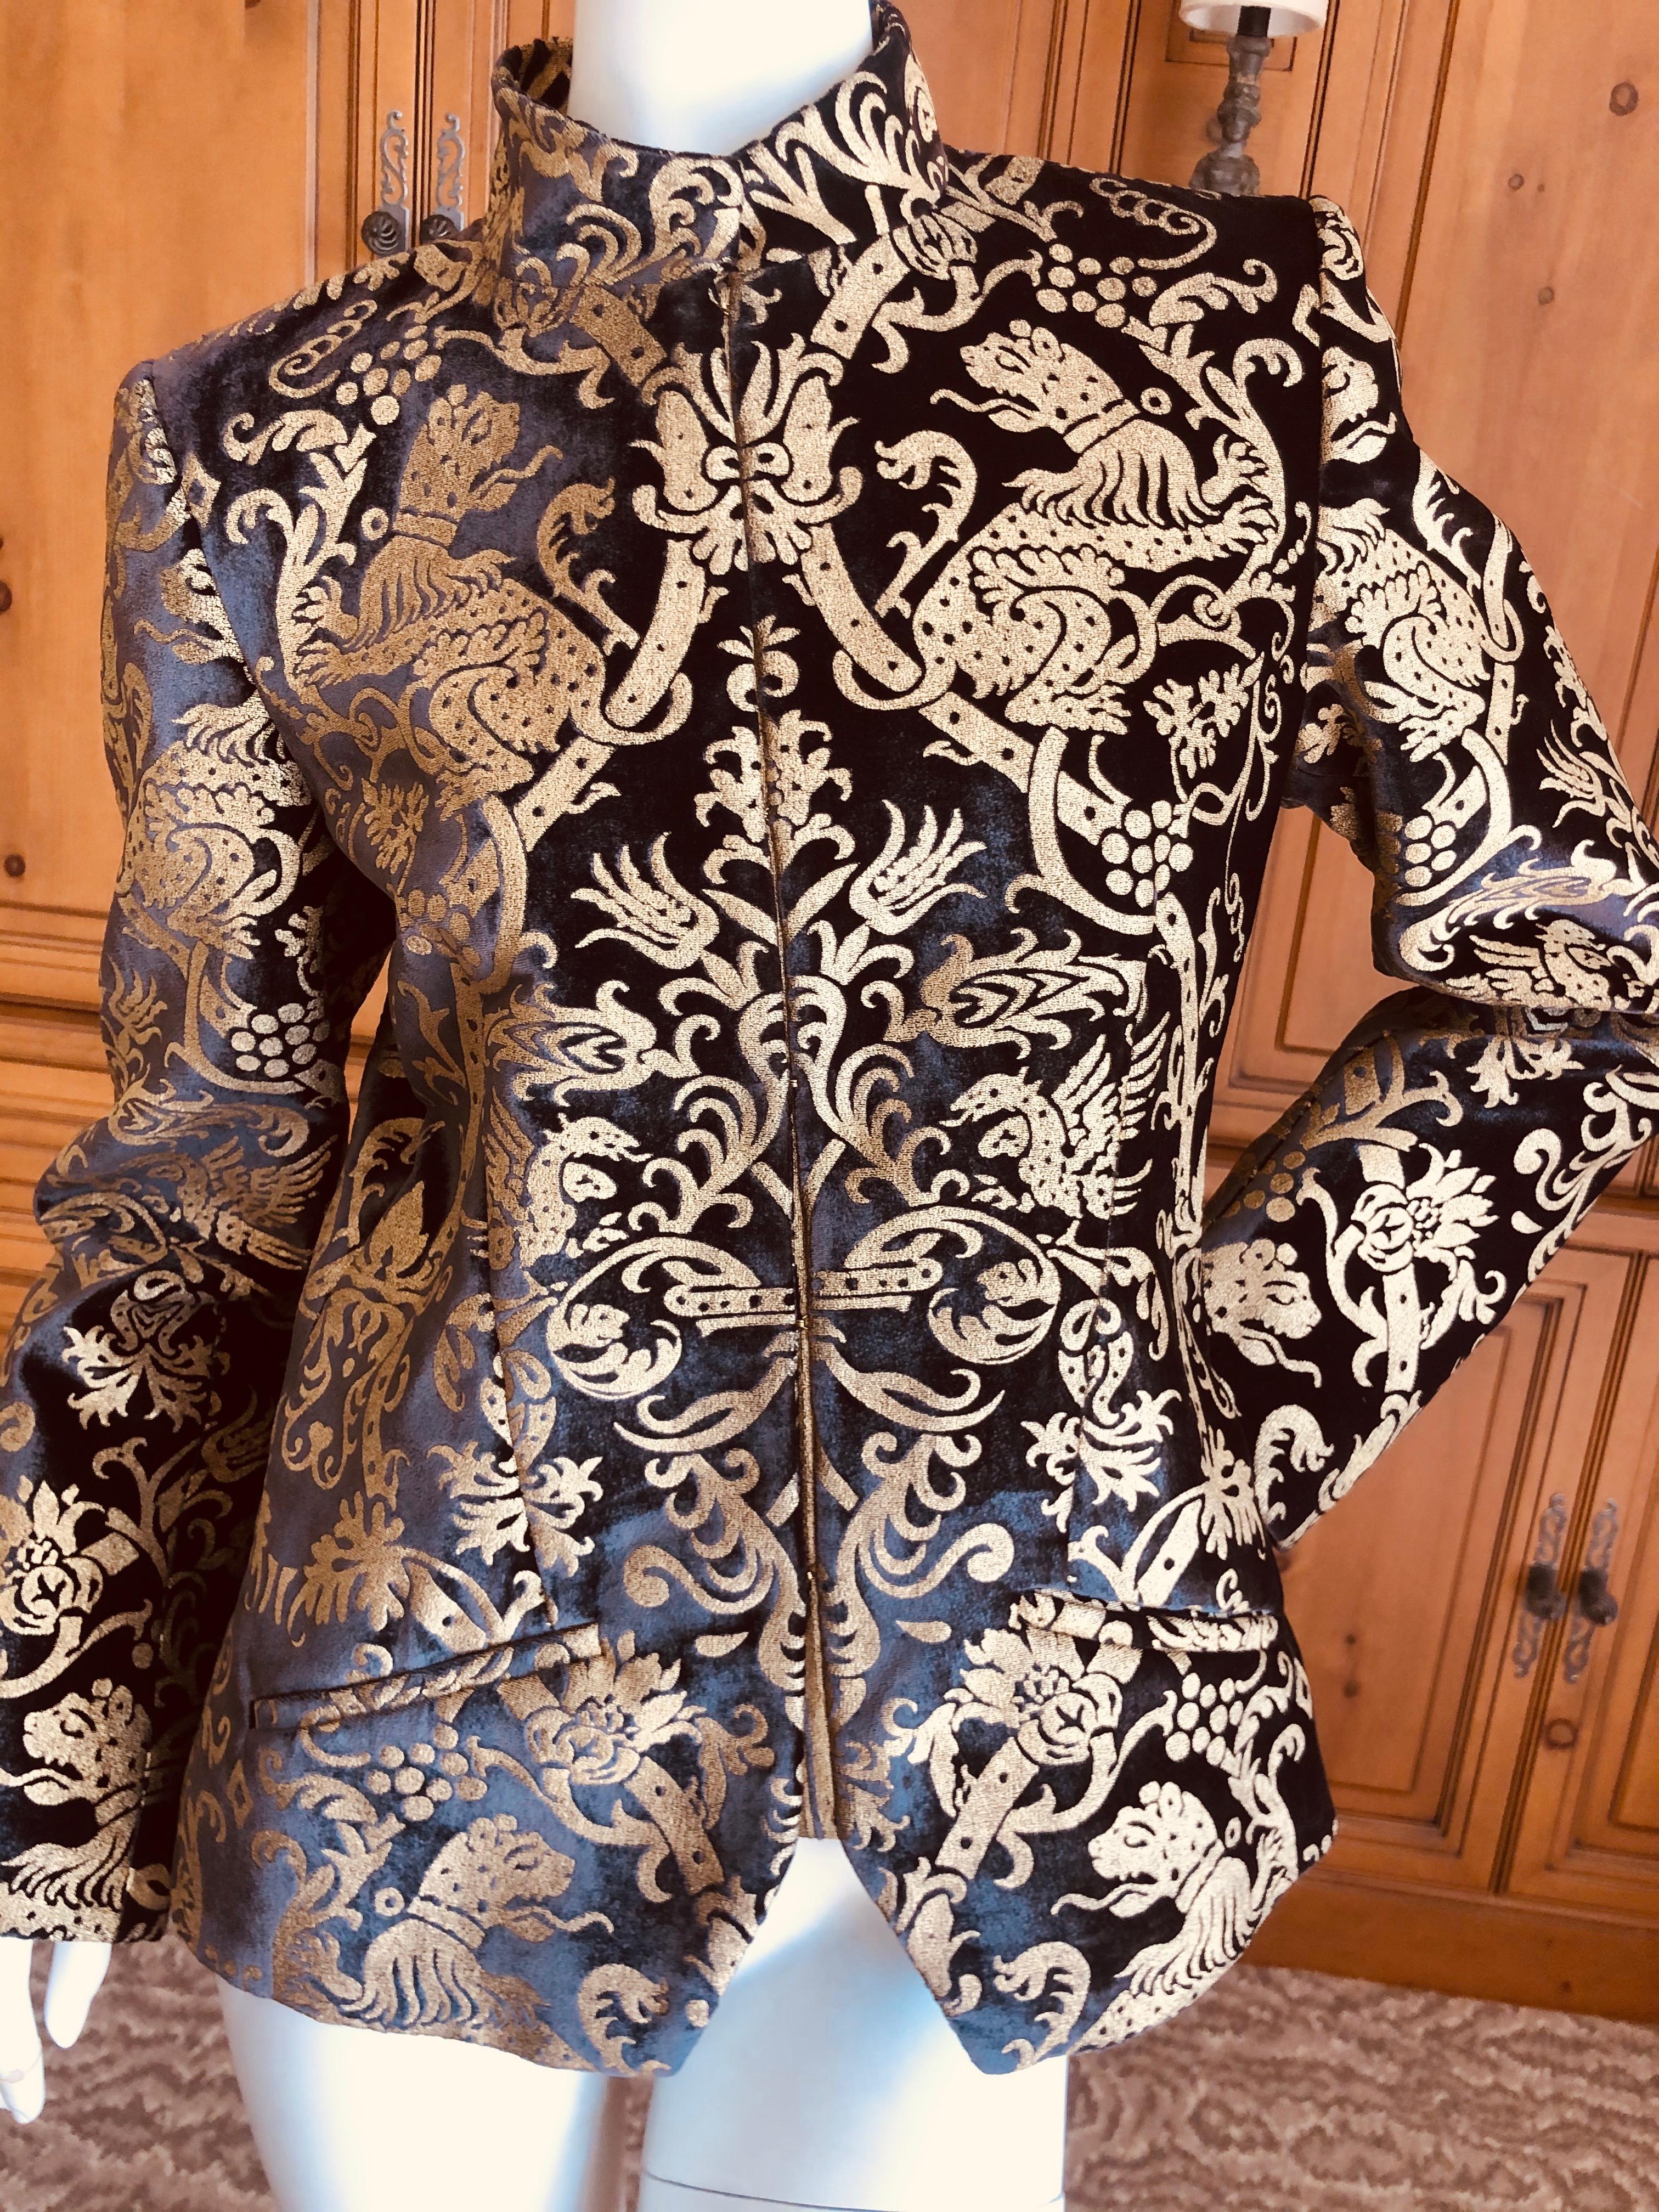 Roberto Cavalli Collectable Fortuny Style Rampant Lion Devore Velvet Jacket
Please use the zoom feature to see all the great details.
Size 46
  Bust 38